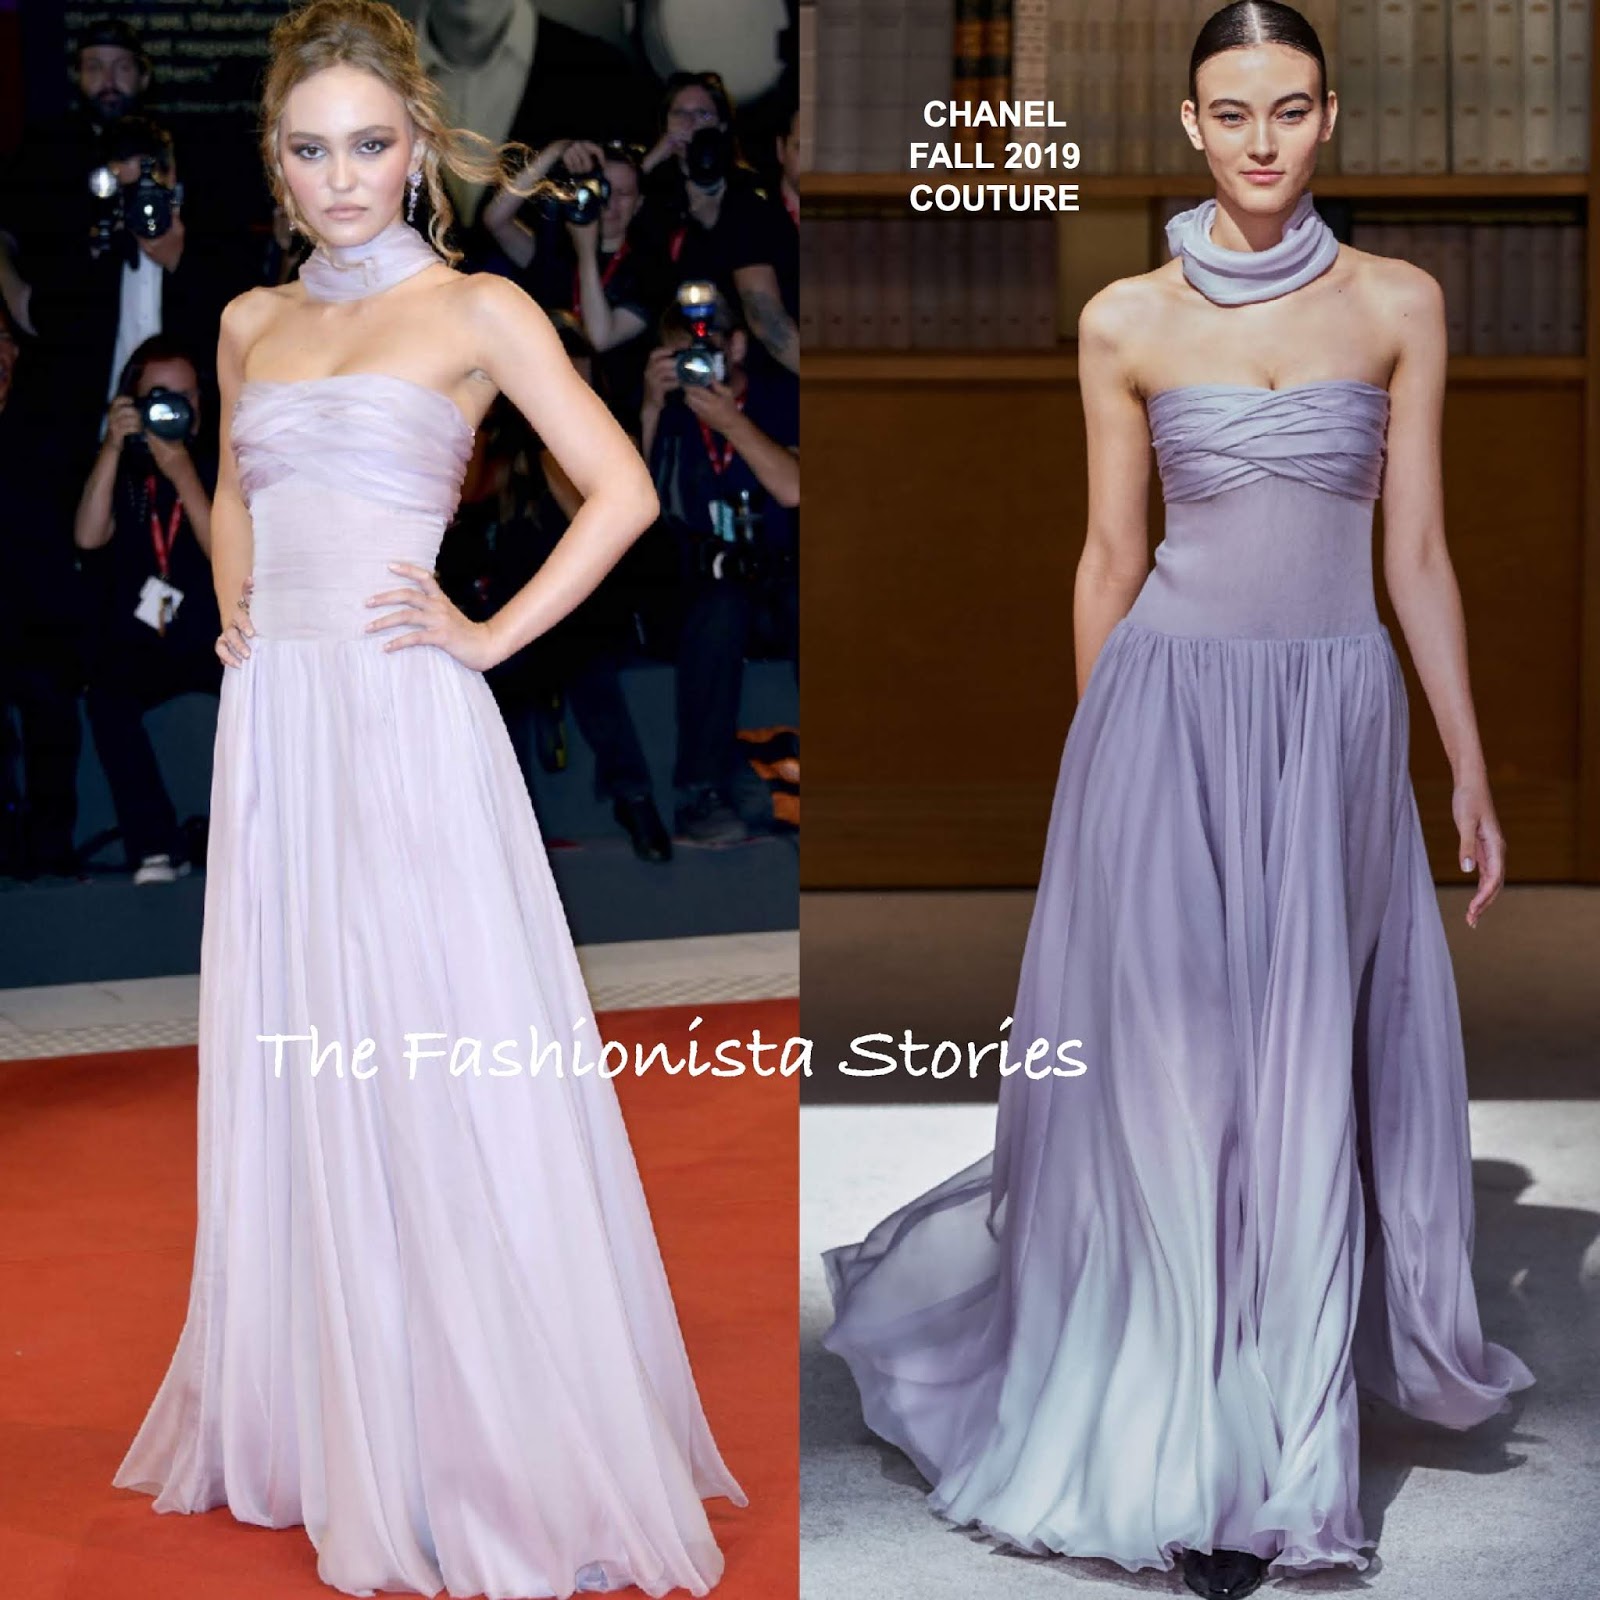 Lily-Rose Depp at Venice Film Festival in Chanel Gown, Silver Sandals –  Footwear News